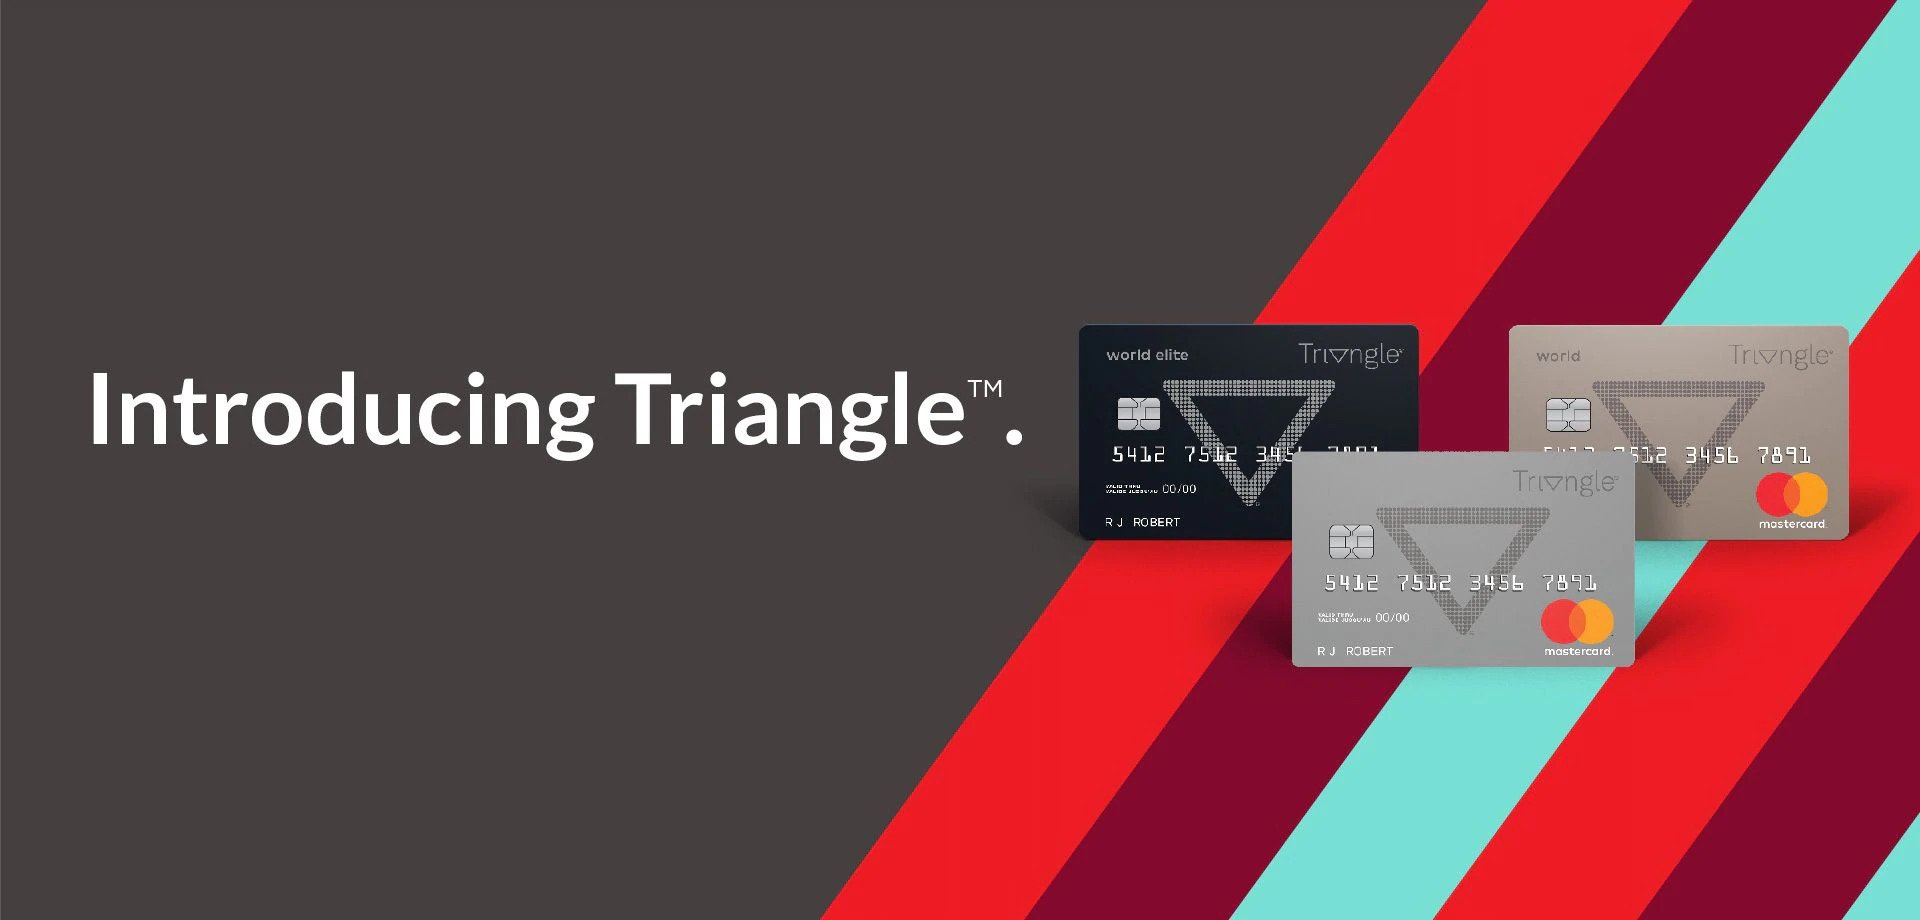 Triangle Mastercard Credit Card - Know the Benefits and How to Apply